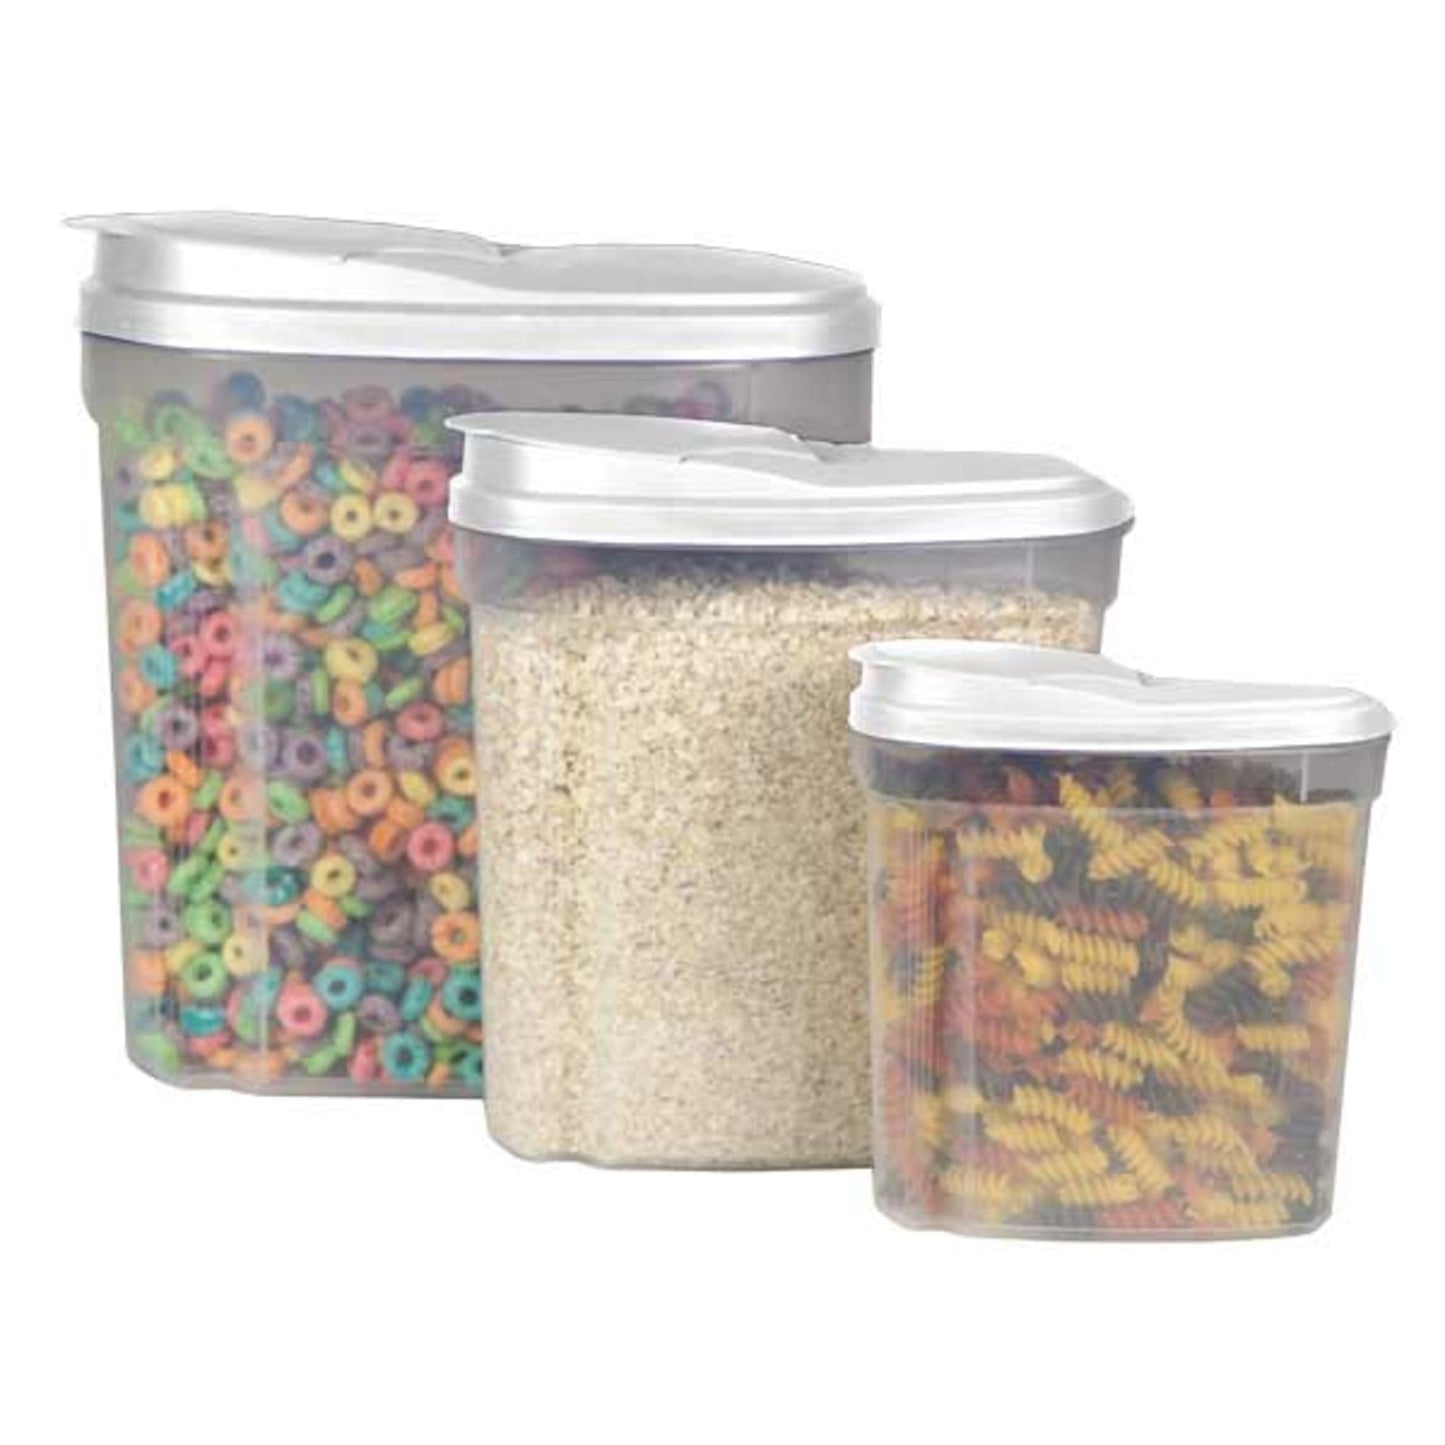 Home Basics Plastic 3-Piece Cereal Container Set with Lids, White